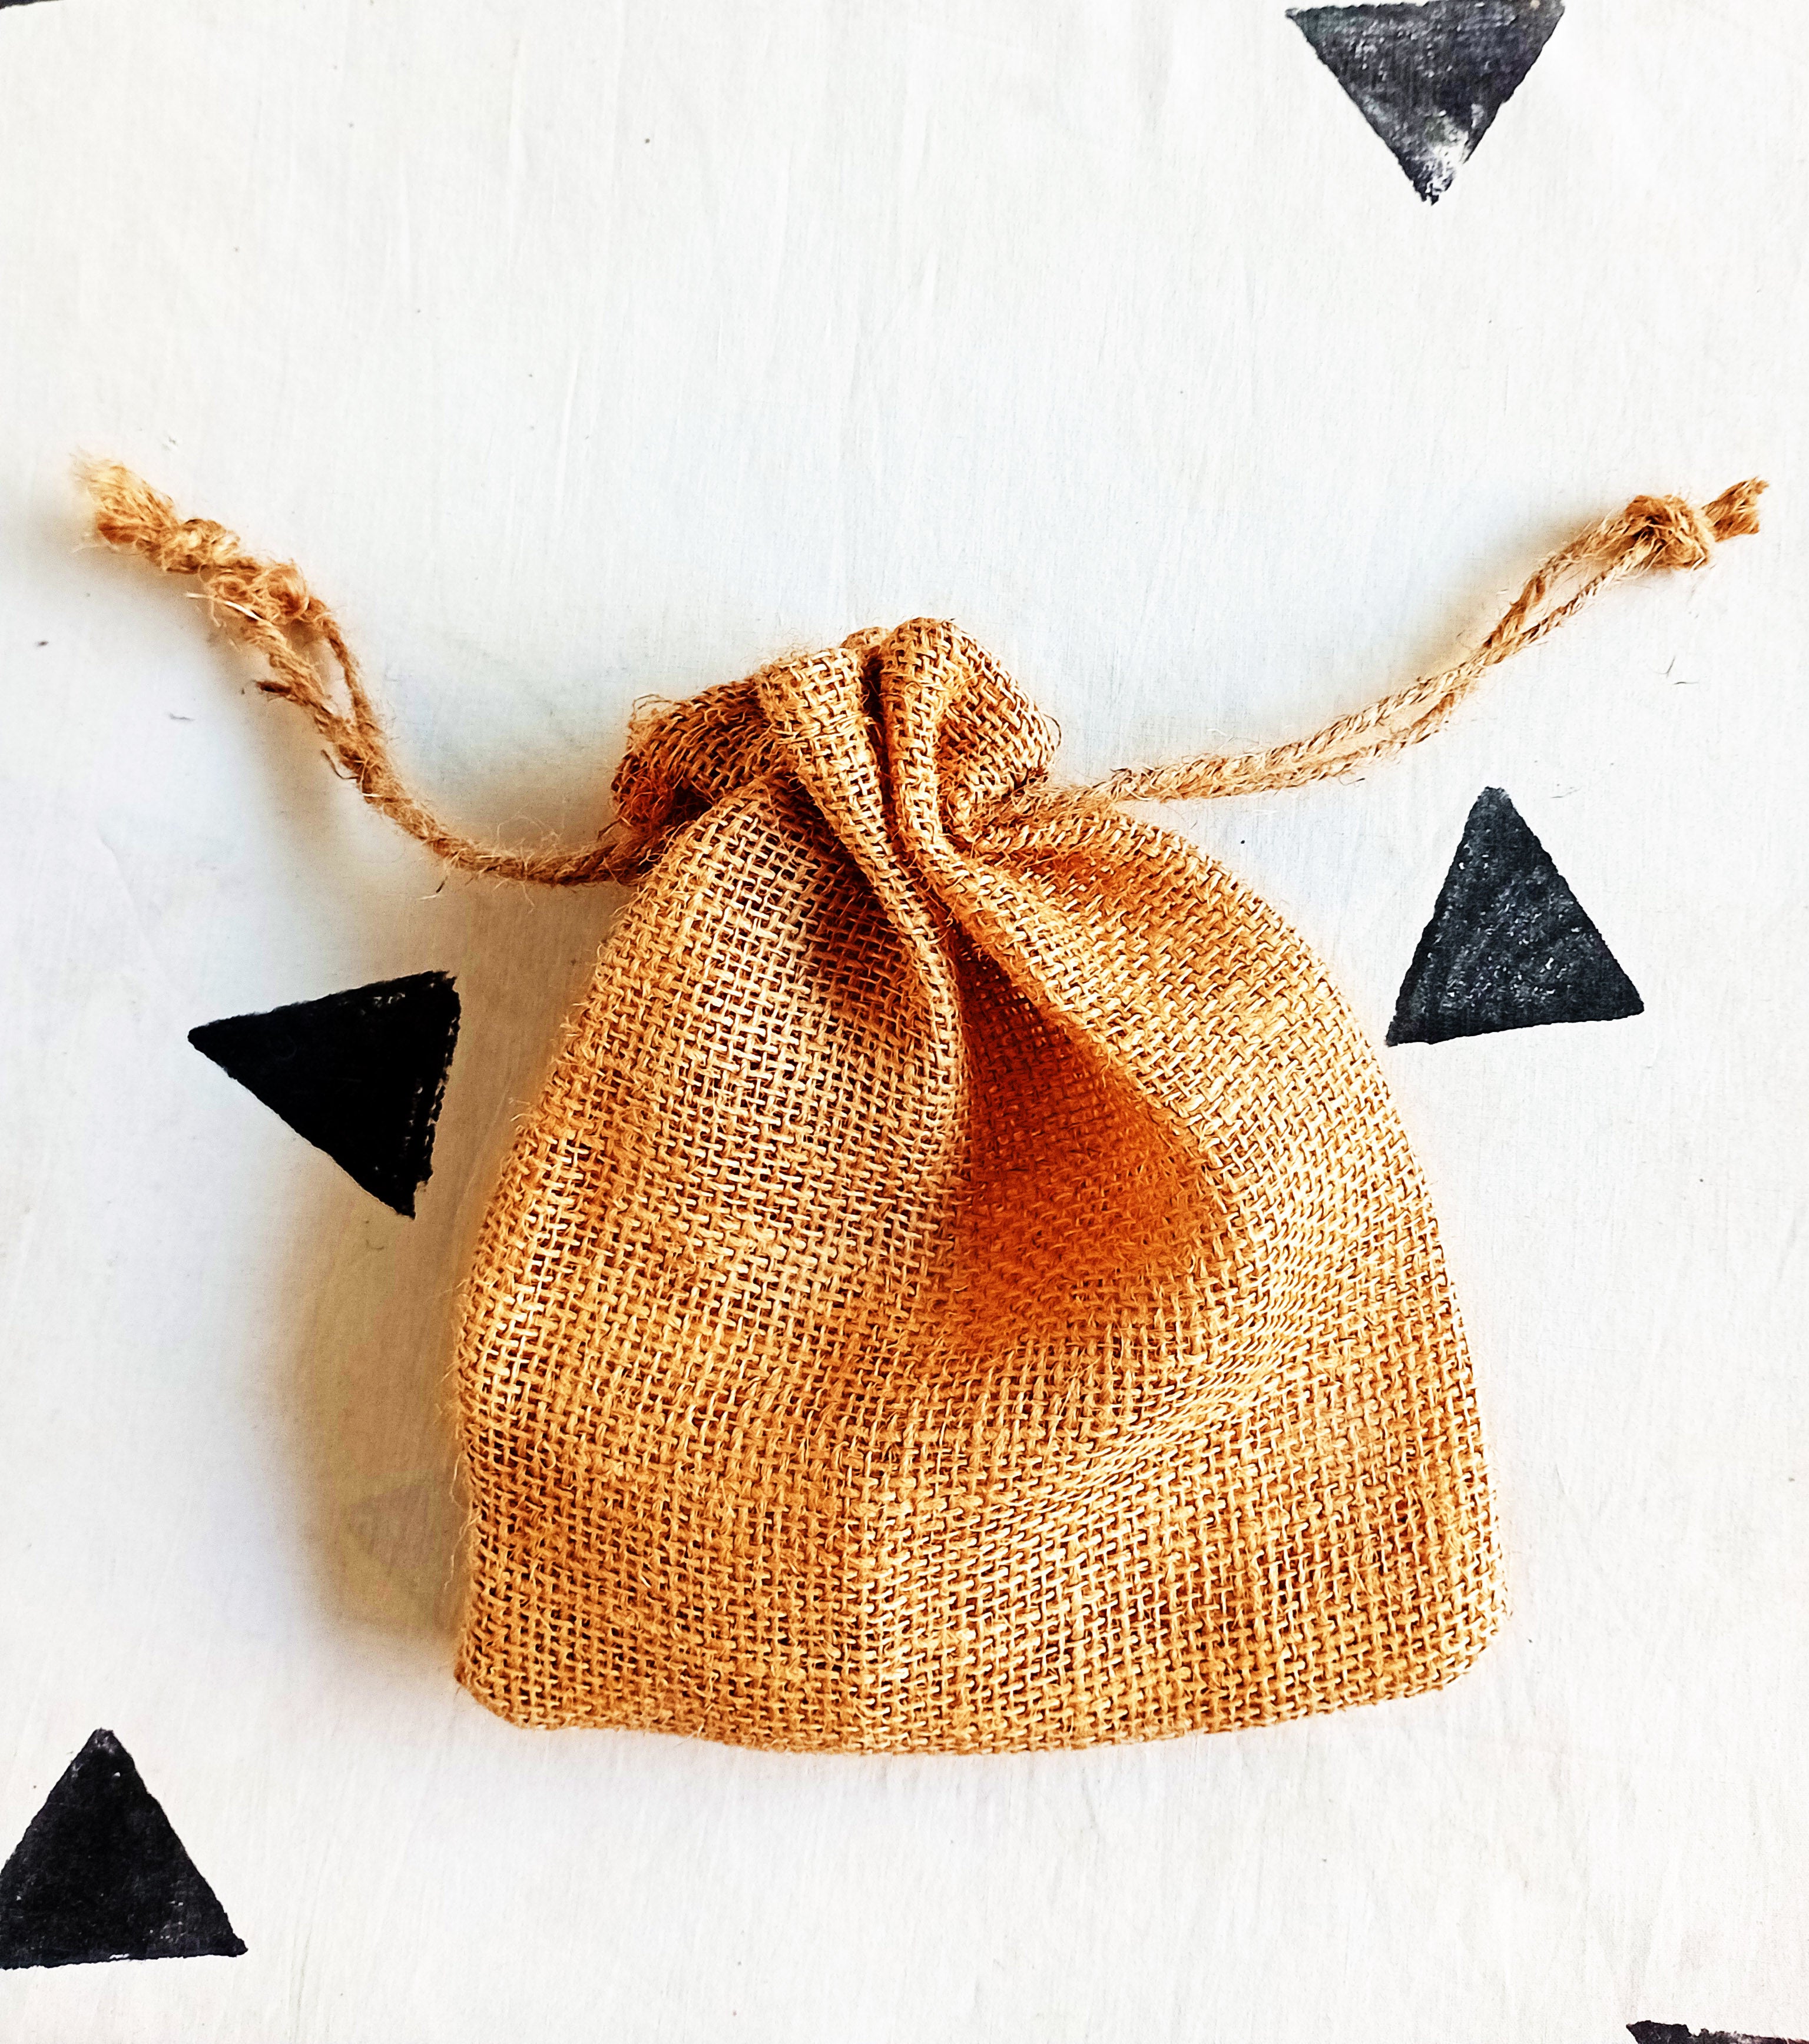 Amazon.com: SIMPLECOOL 25pcs Burlap Gift Bags. Small Drawstring Gift Bags  Jewelry Bags. Reusable Burlap Bags for Birthday, Party, Wedding Favors,  Christmas, Art and DIY Craft. (4x6) : Health & Household